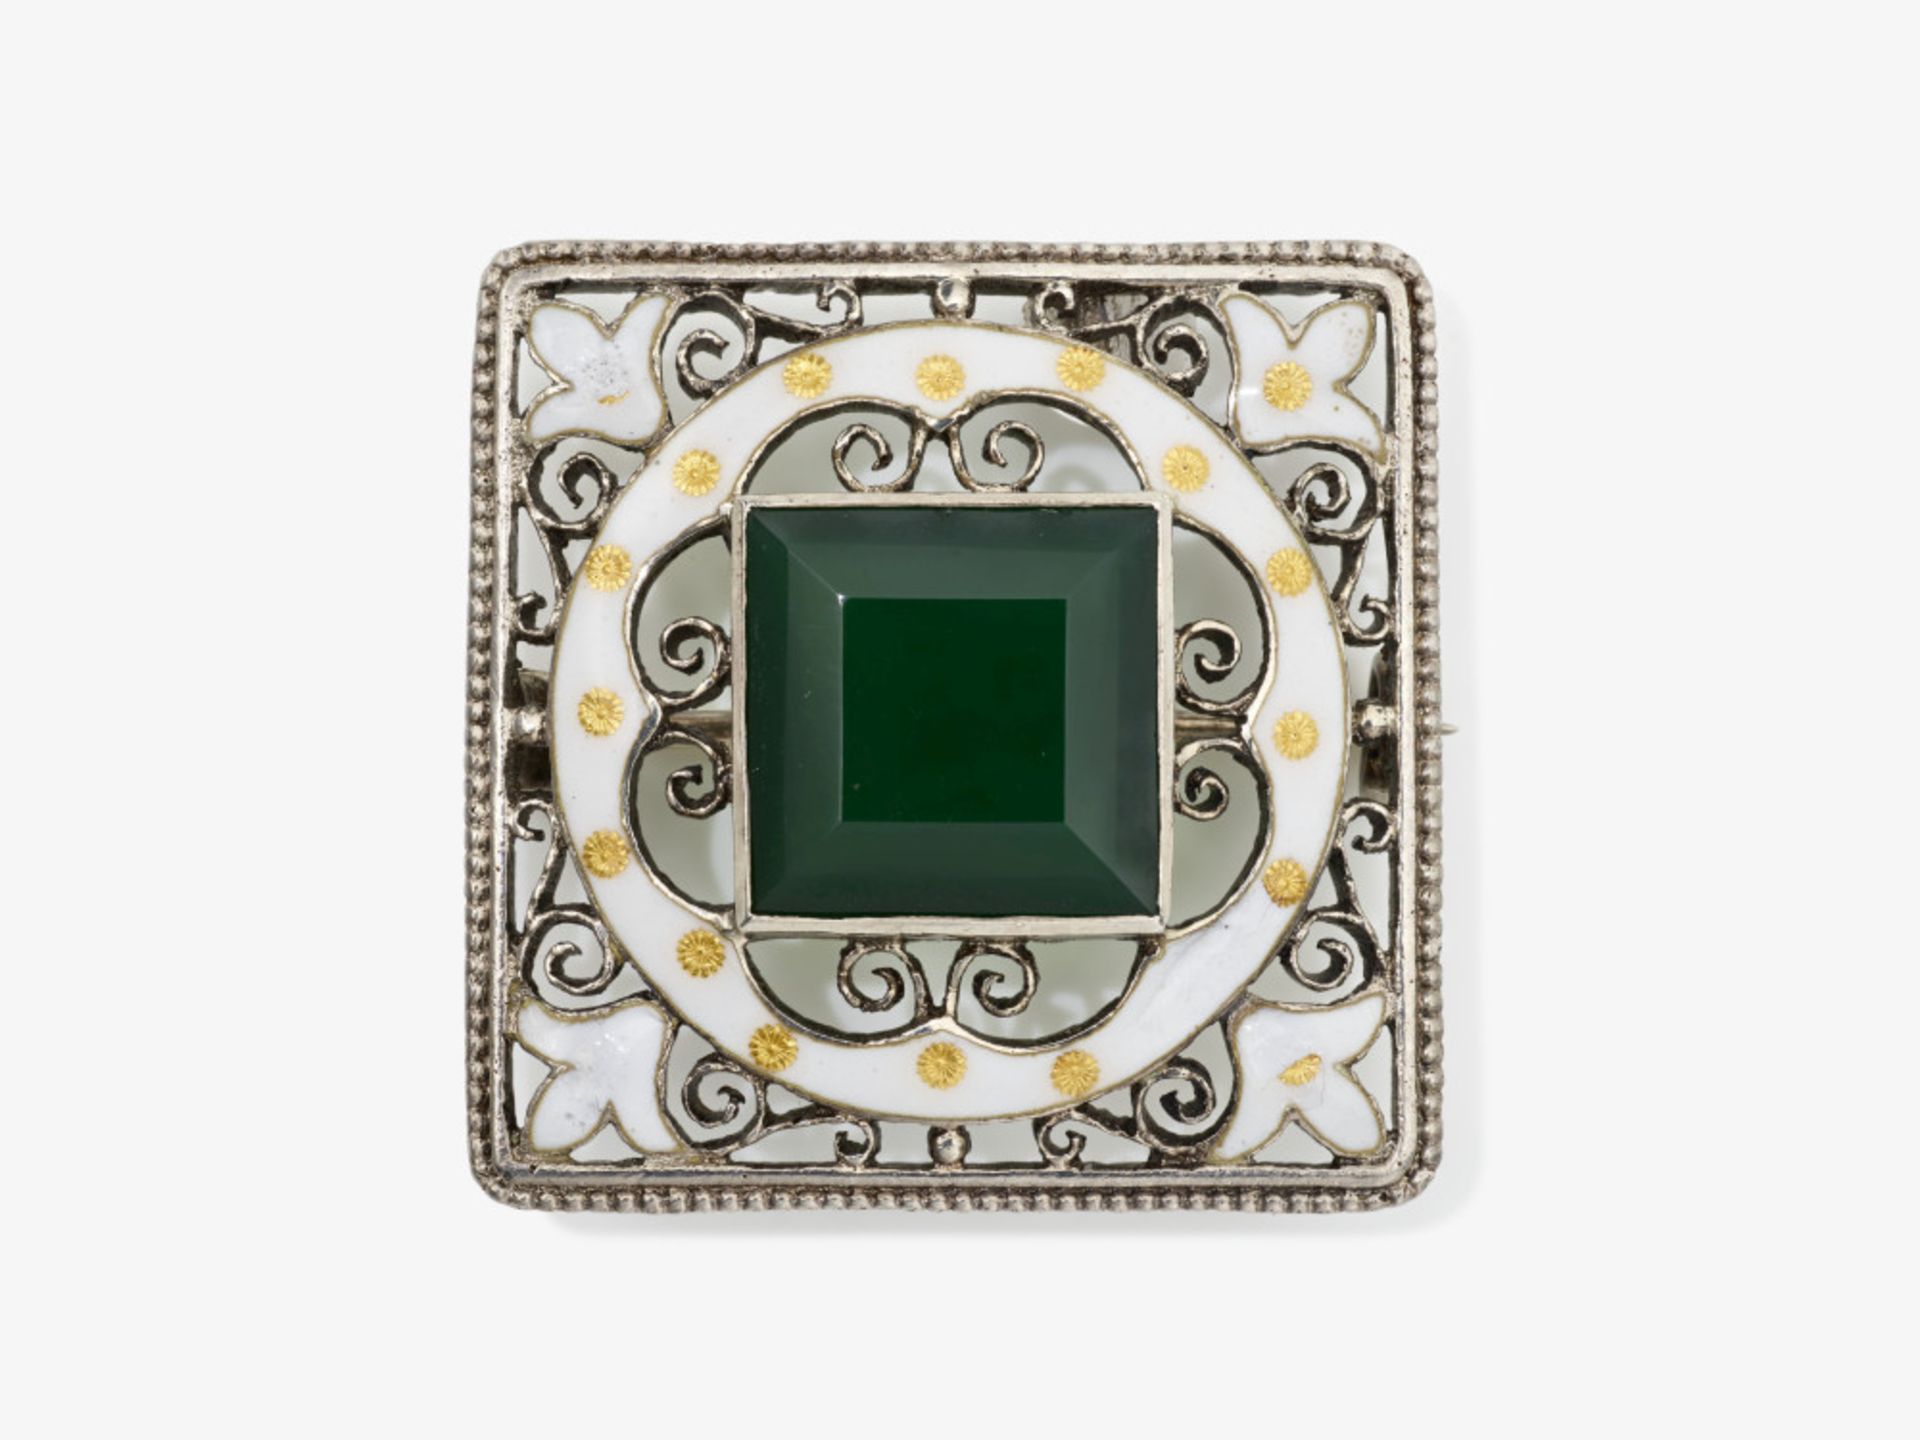 A brooch with green glass stone and white enamel - Image 4 of 4